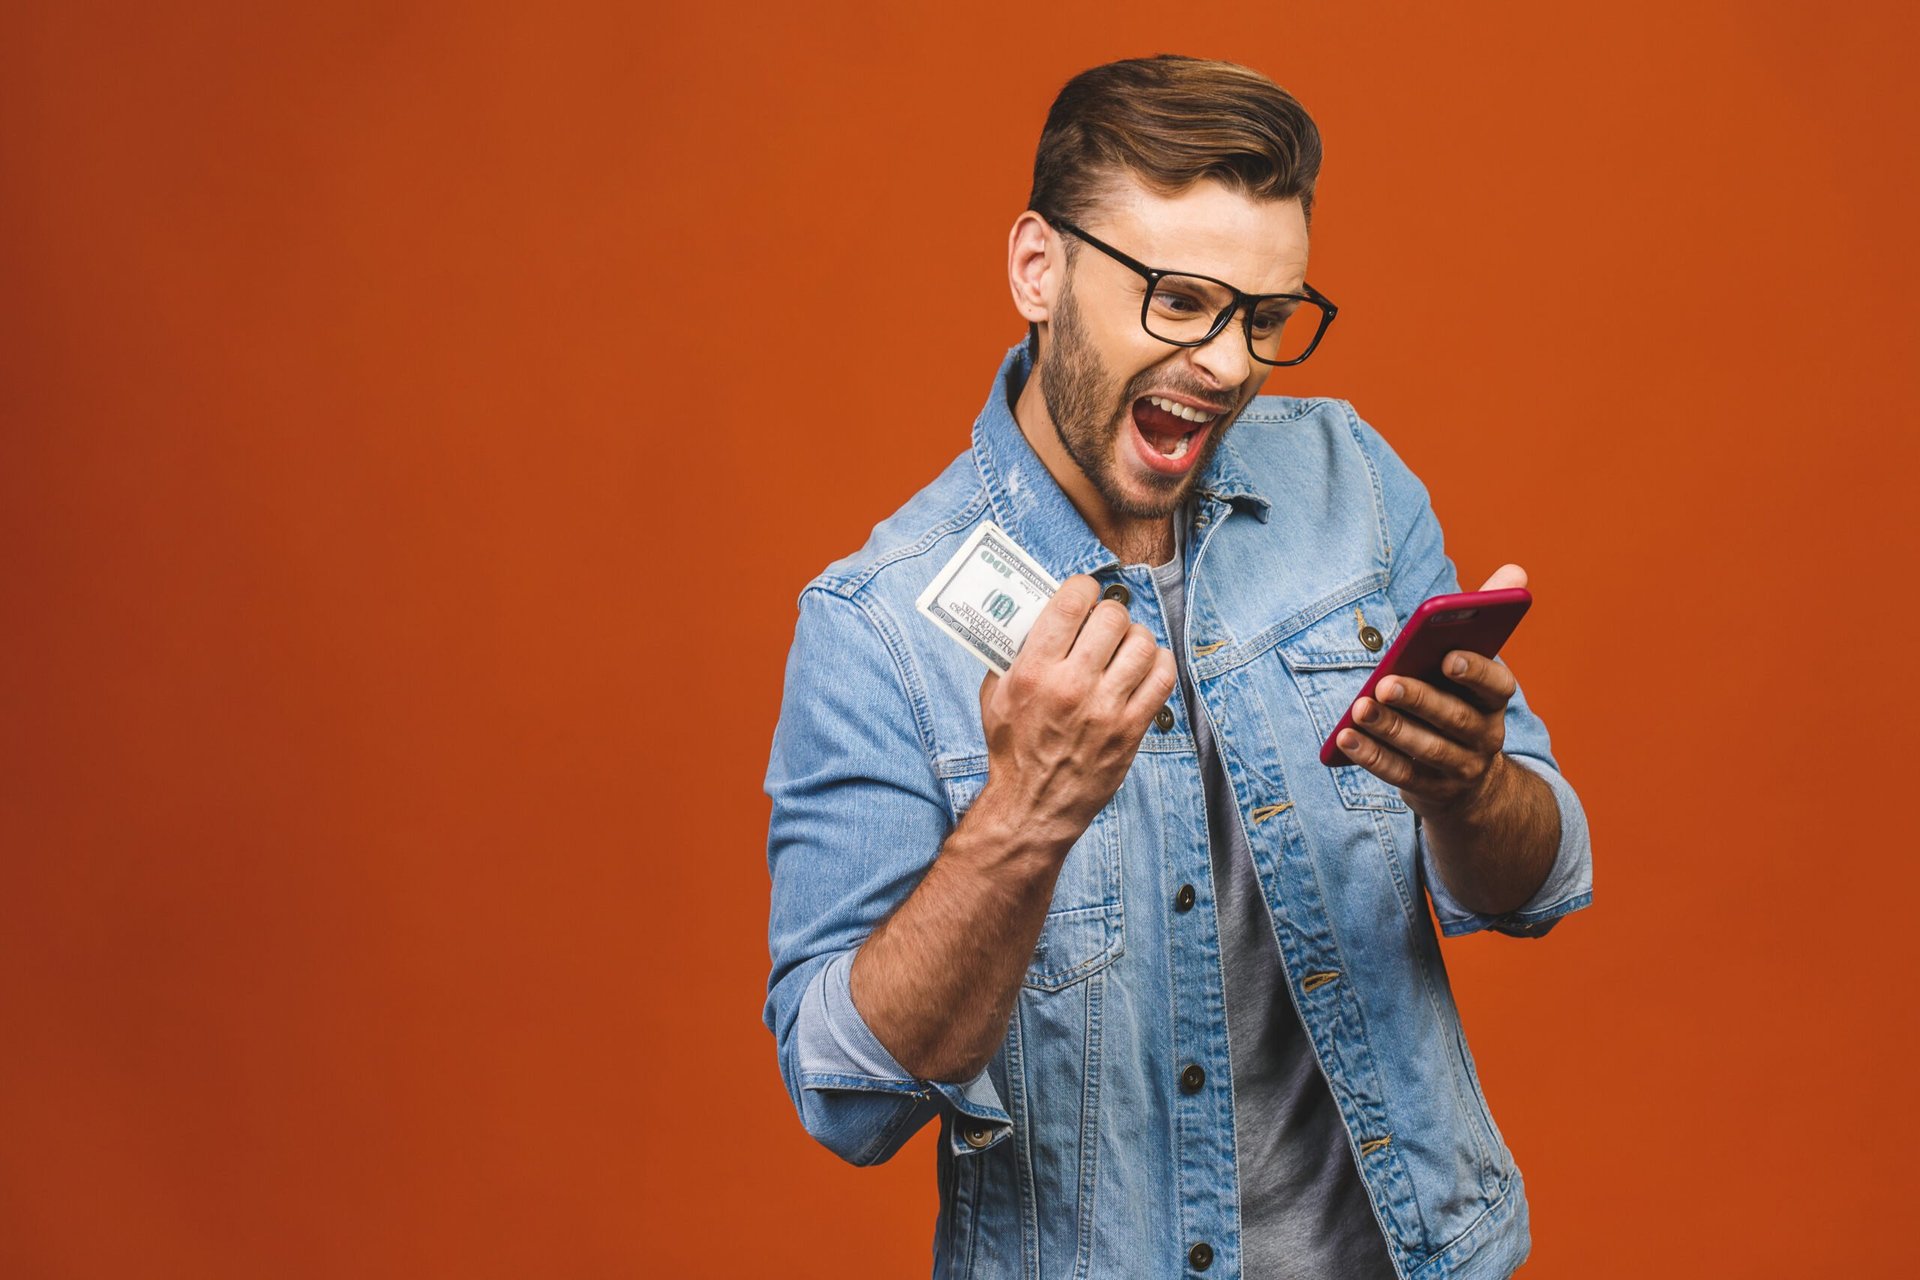 Man excited about savings on his cell phone smartphone plan